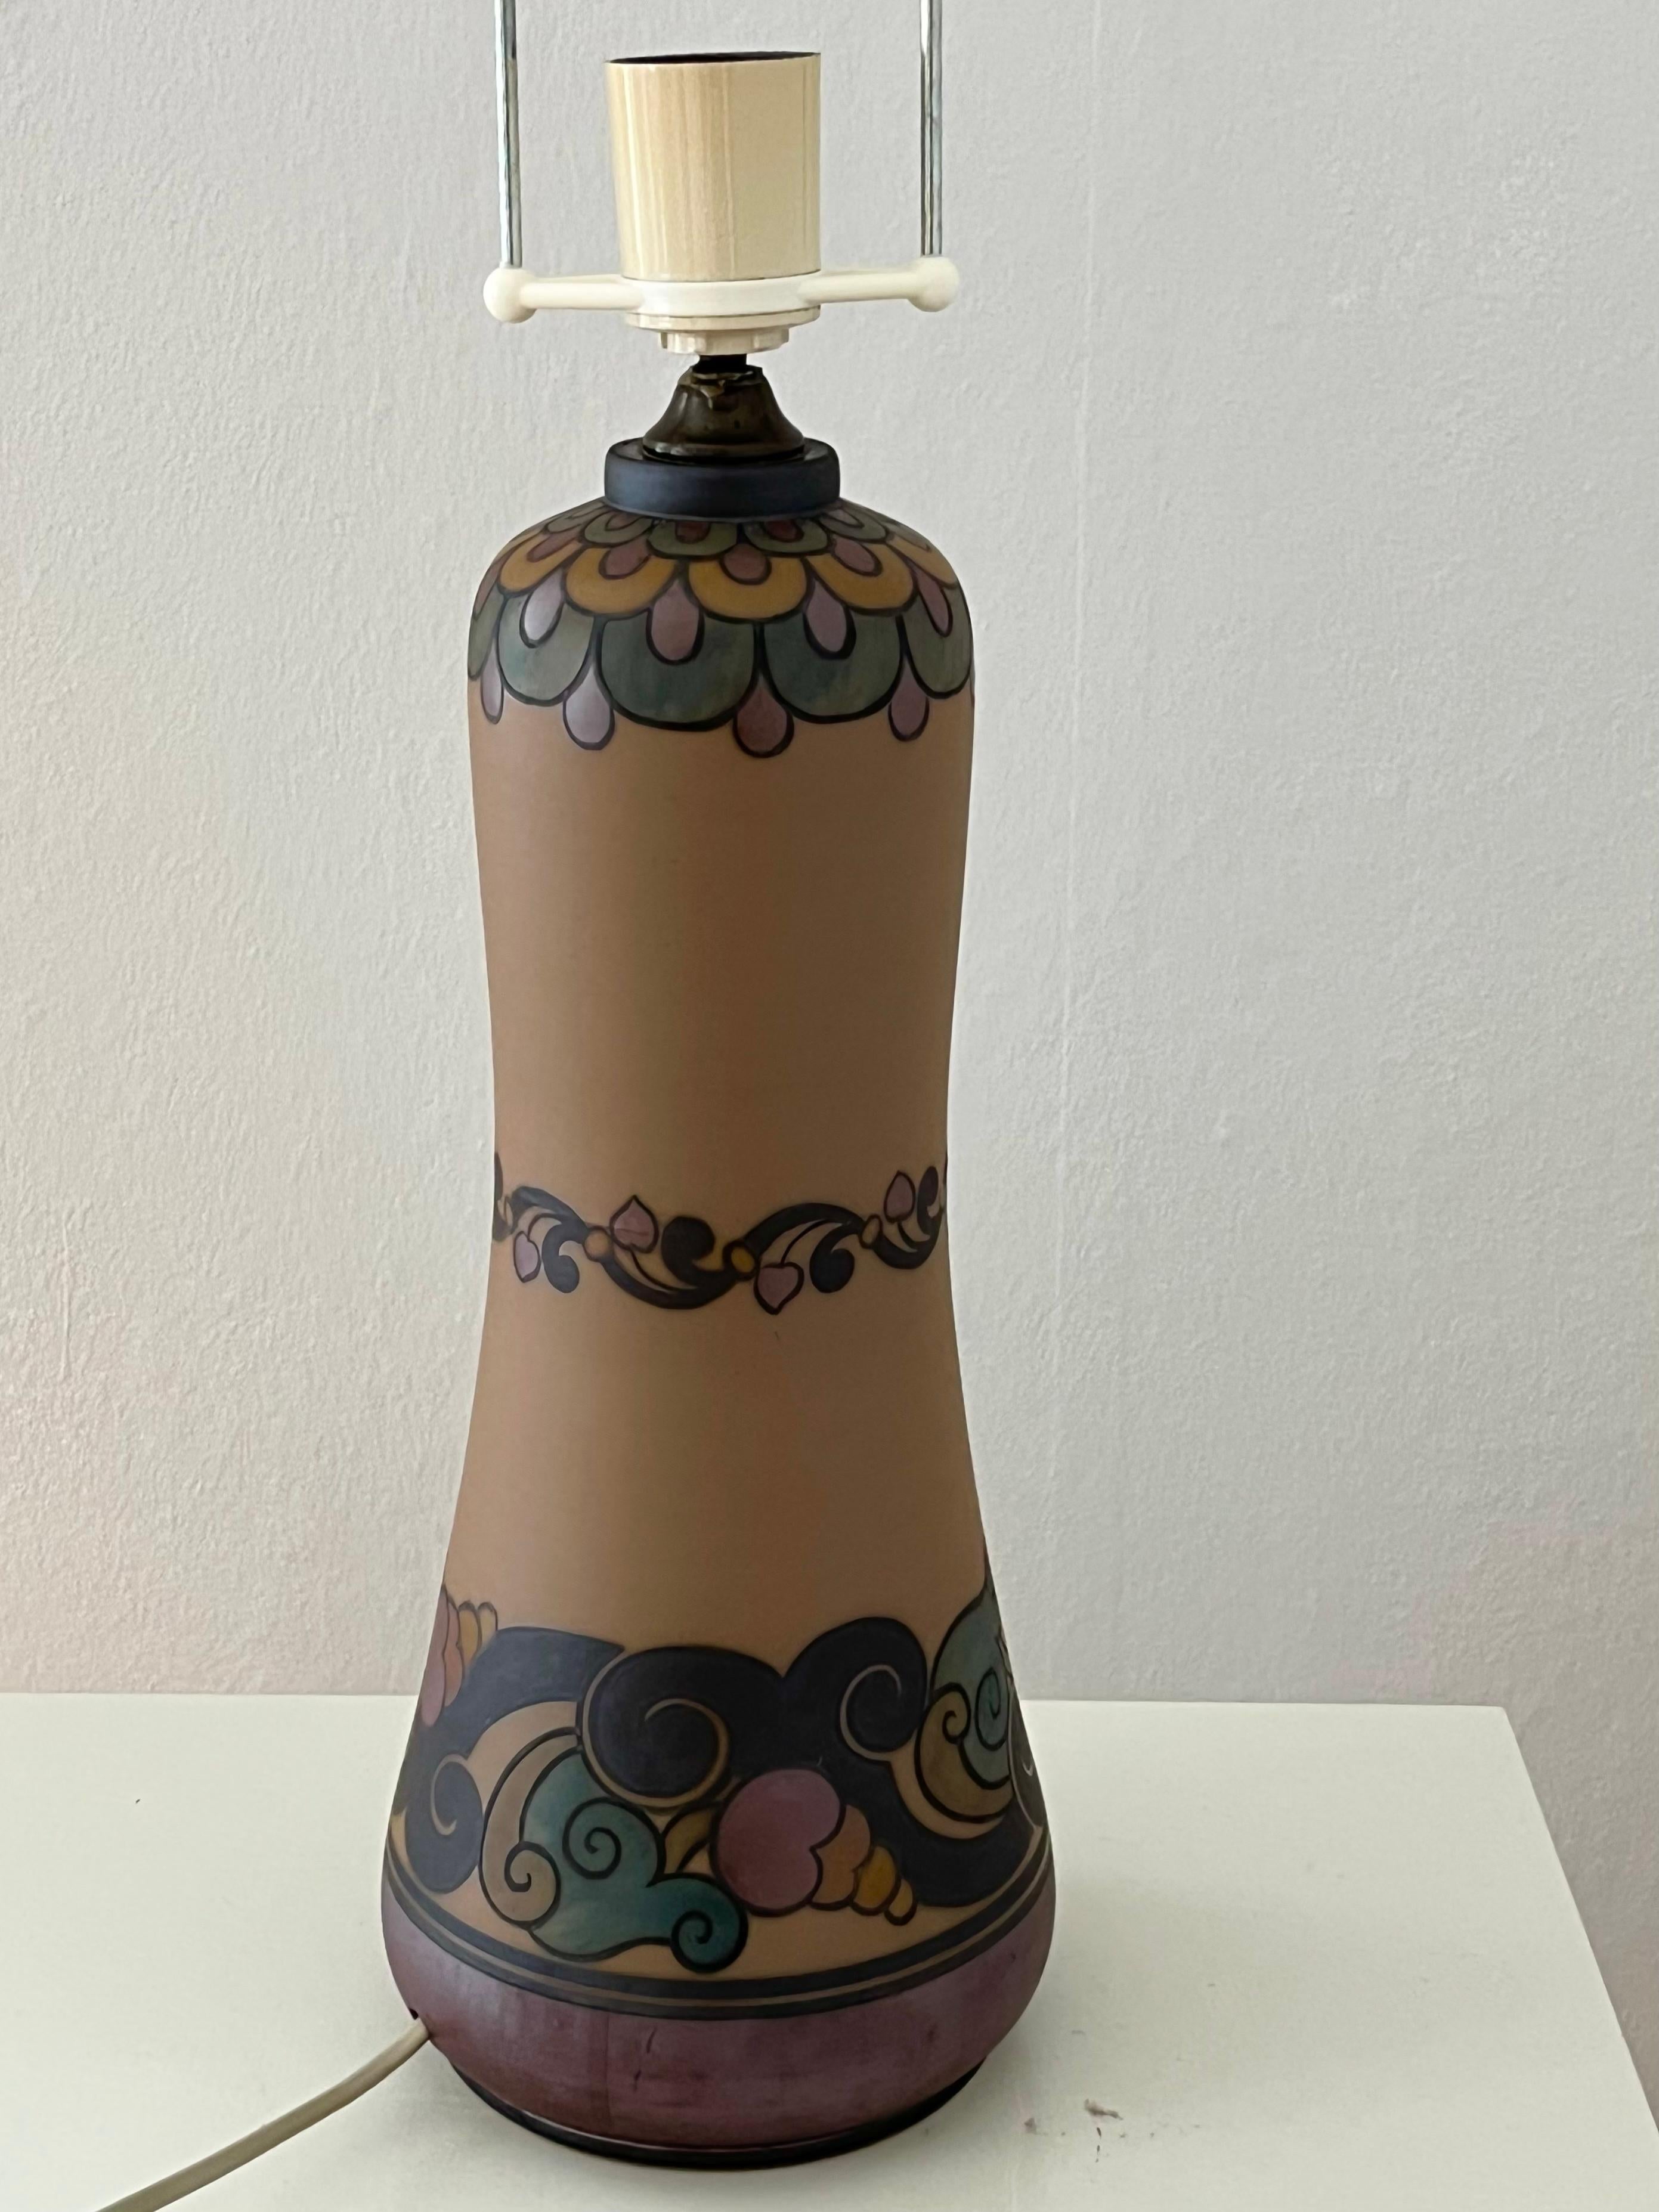 20th Century 1930s Danish art nouveau ceramic hand decorated table lamp by L. Hjort For Sale